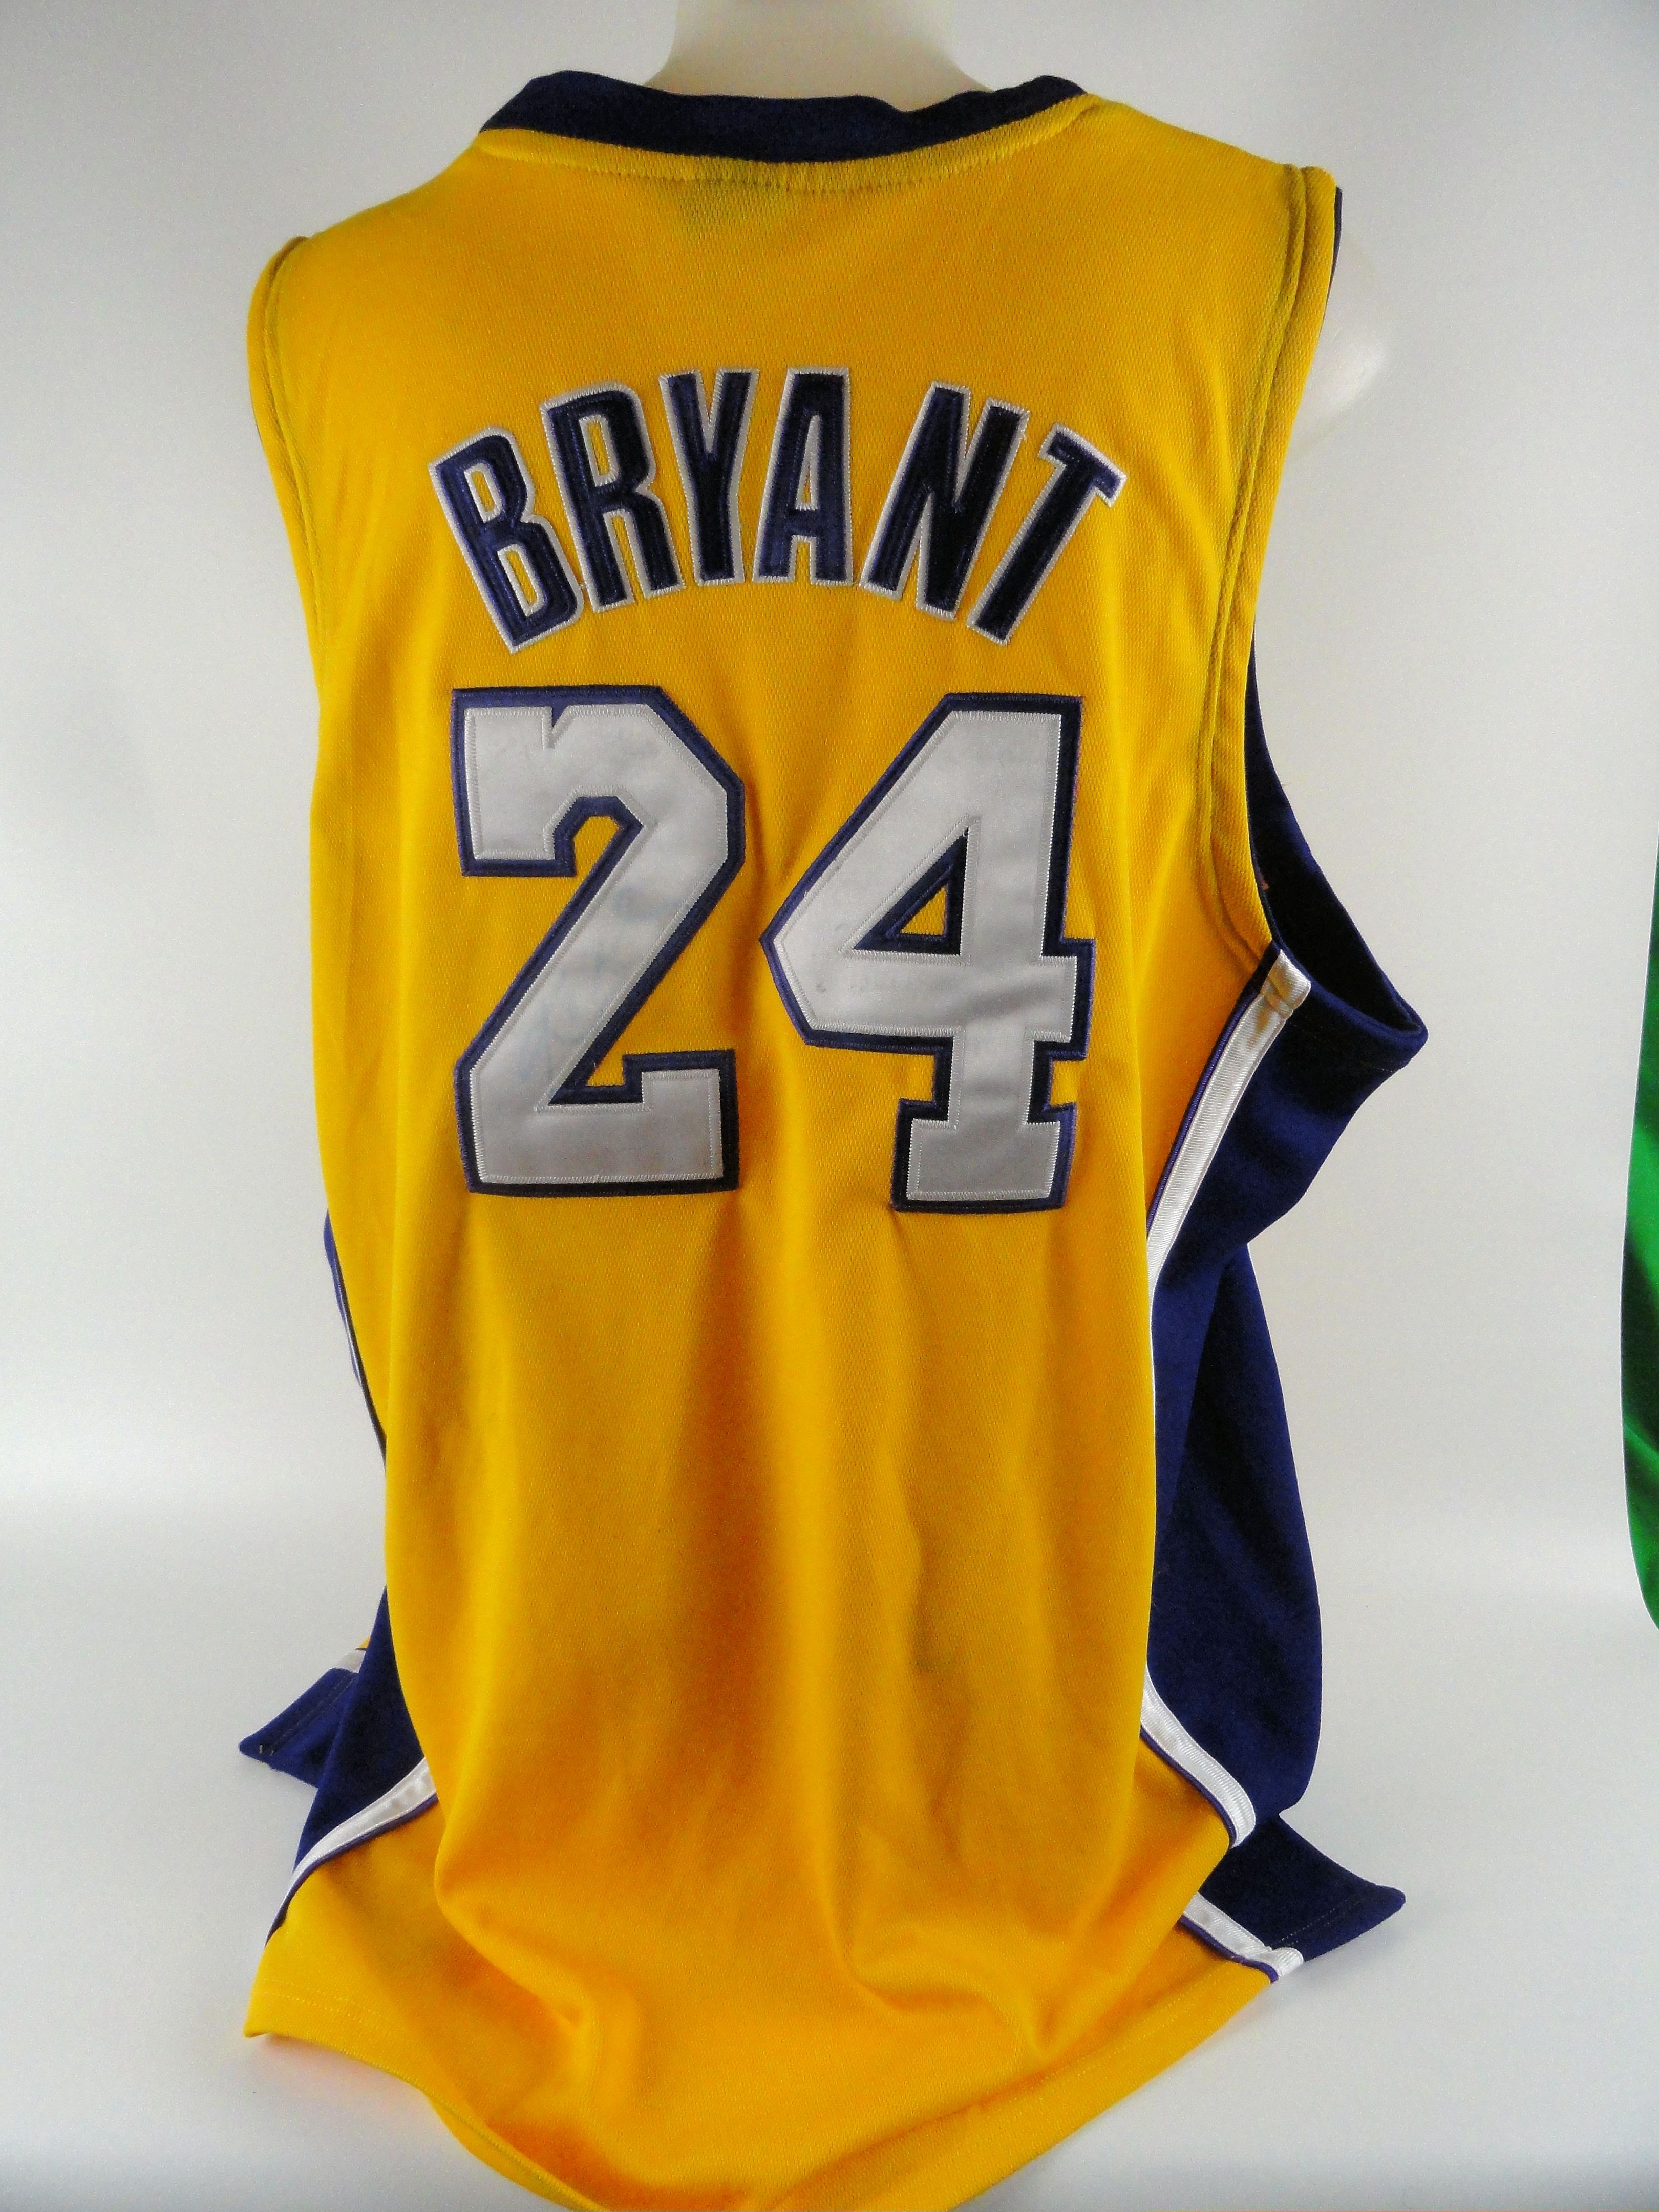 KOBE BRYANT SIGNED LIMITED EDITION NBA FINALS JERSEY